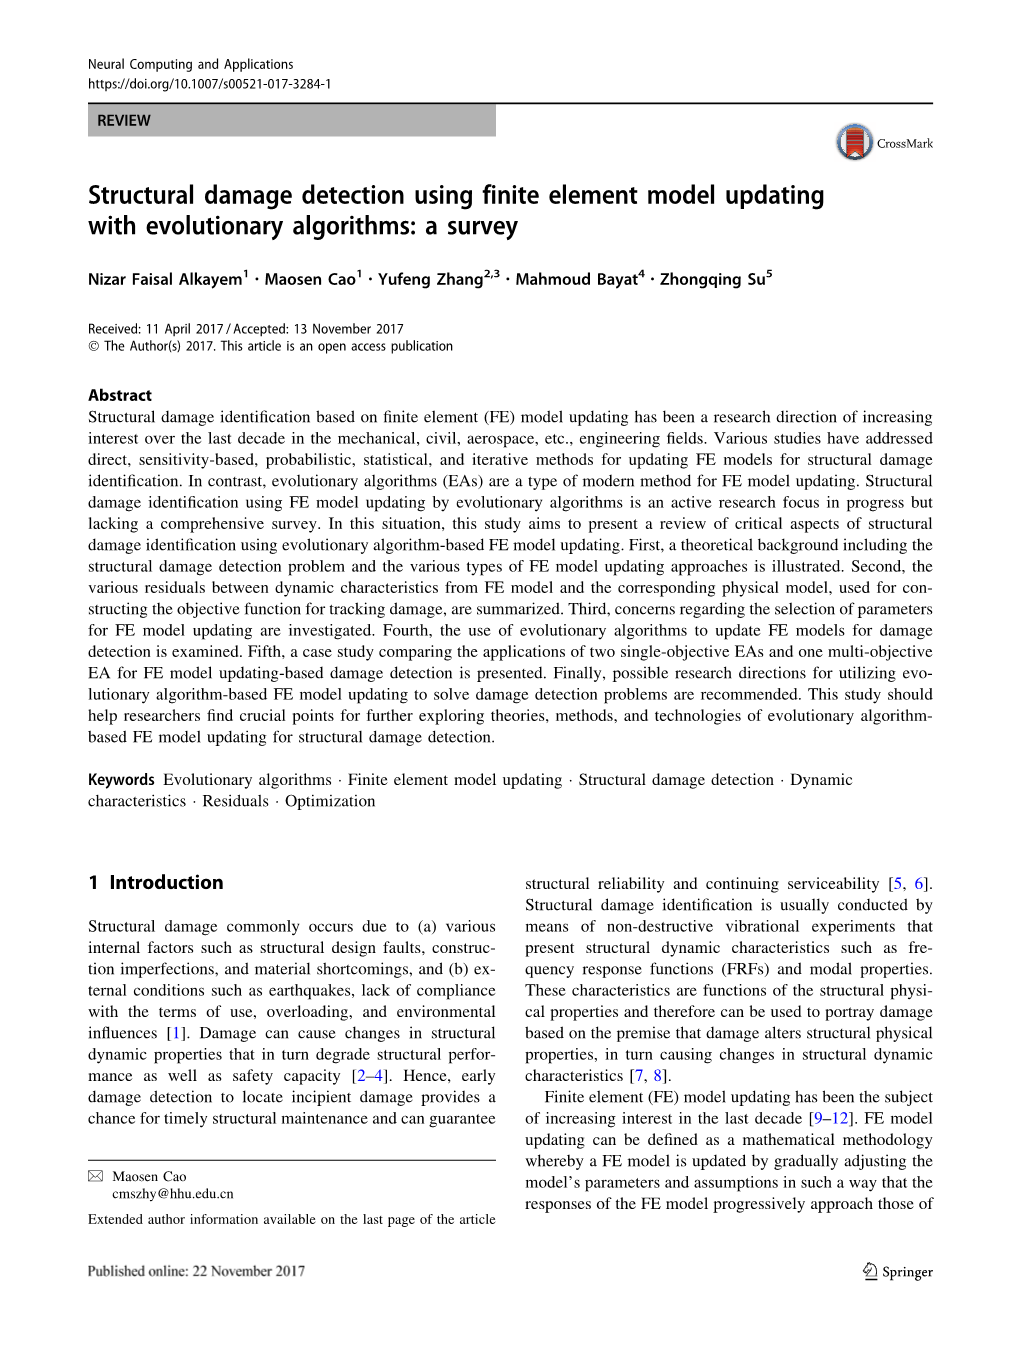 Structural Damage Detection Using Finite Element Model Updating with Evolutionary Algorithms: a Survey